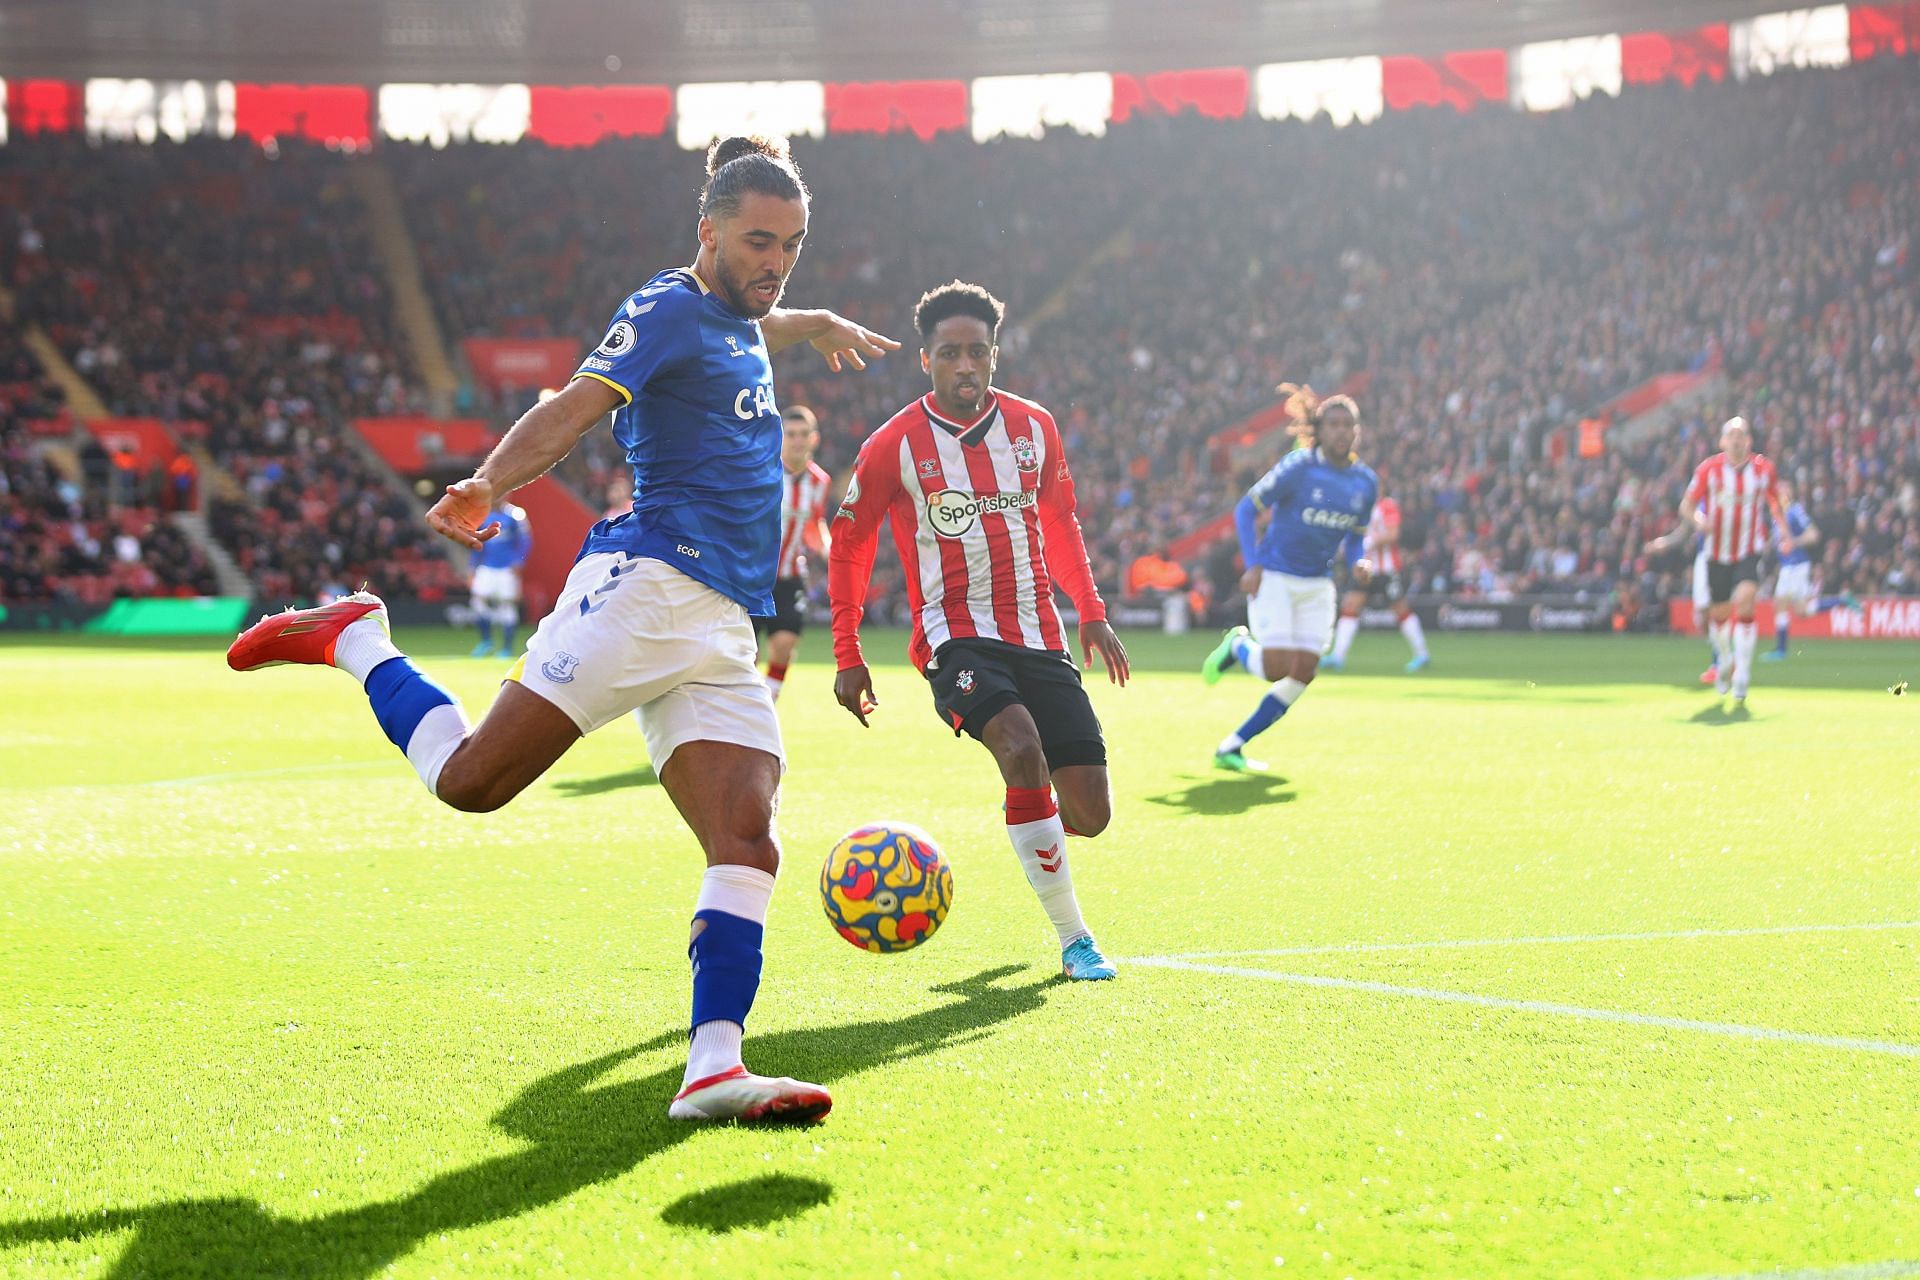 Dominic Calvert-Lewin has been out of form this season.